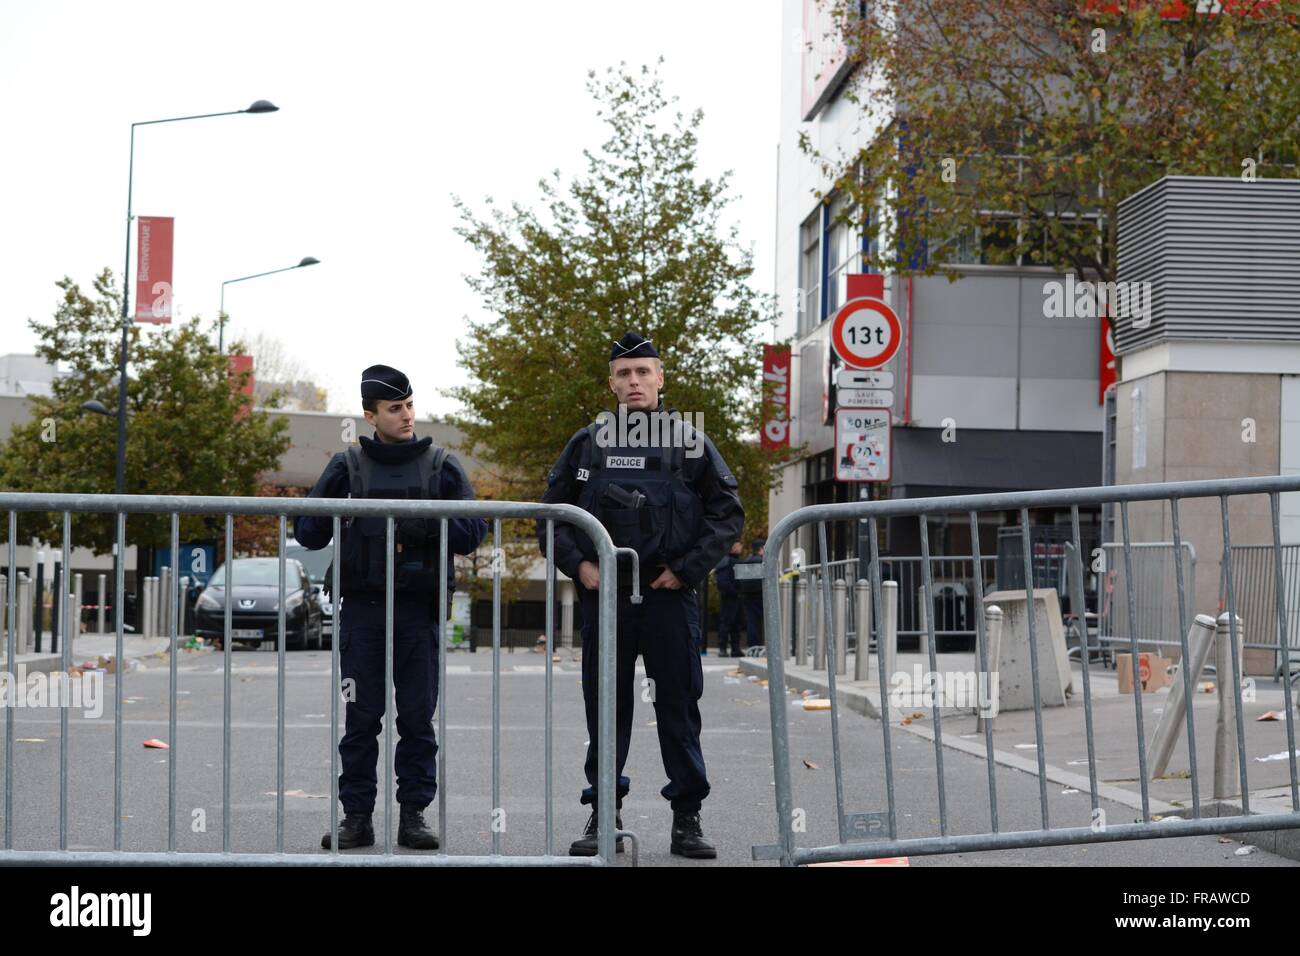 November 14th 2015. Paris, France. French police stand guard outside the Stade de France, Saint-Denis.  ©Marc Ward/Alamy Stock Photo